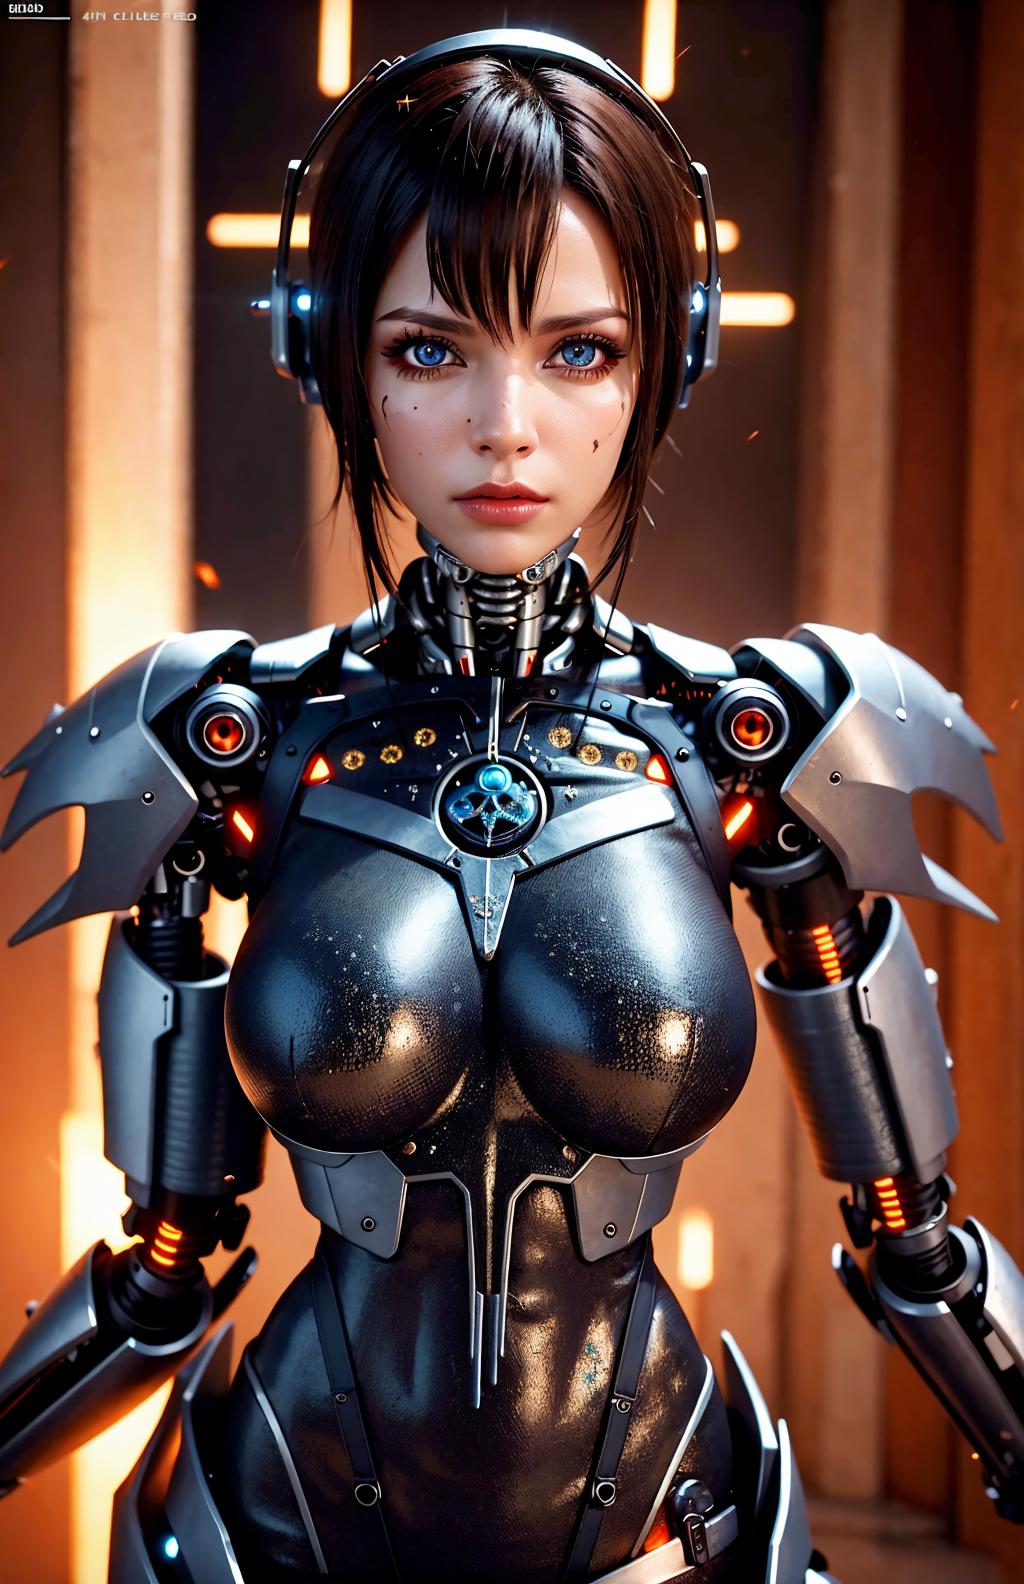 AI model image by 3moon